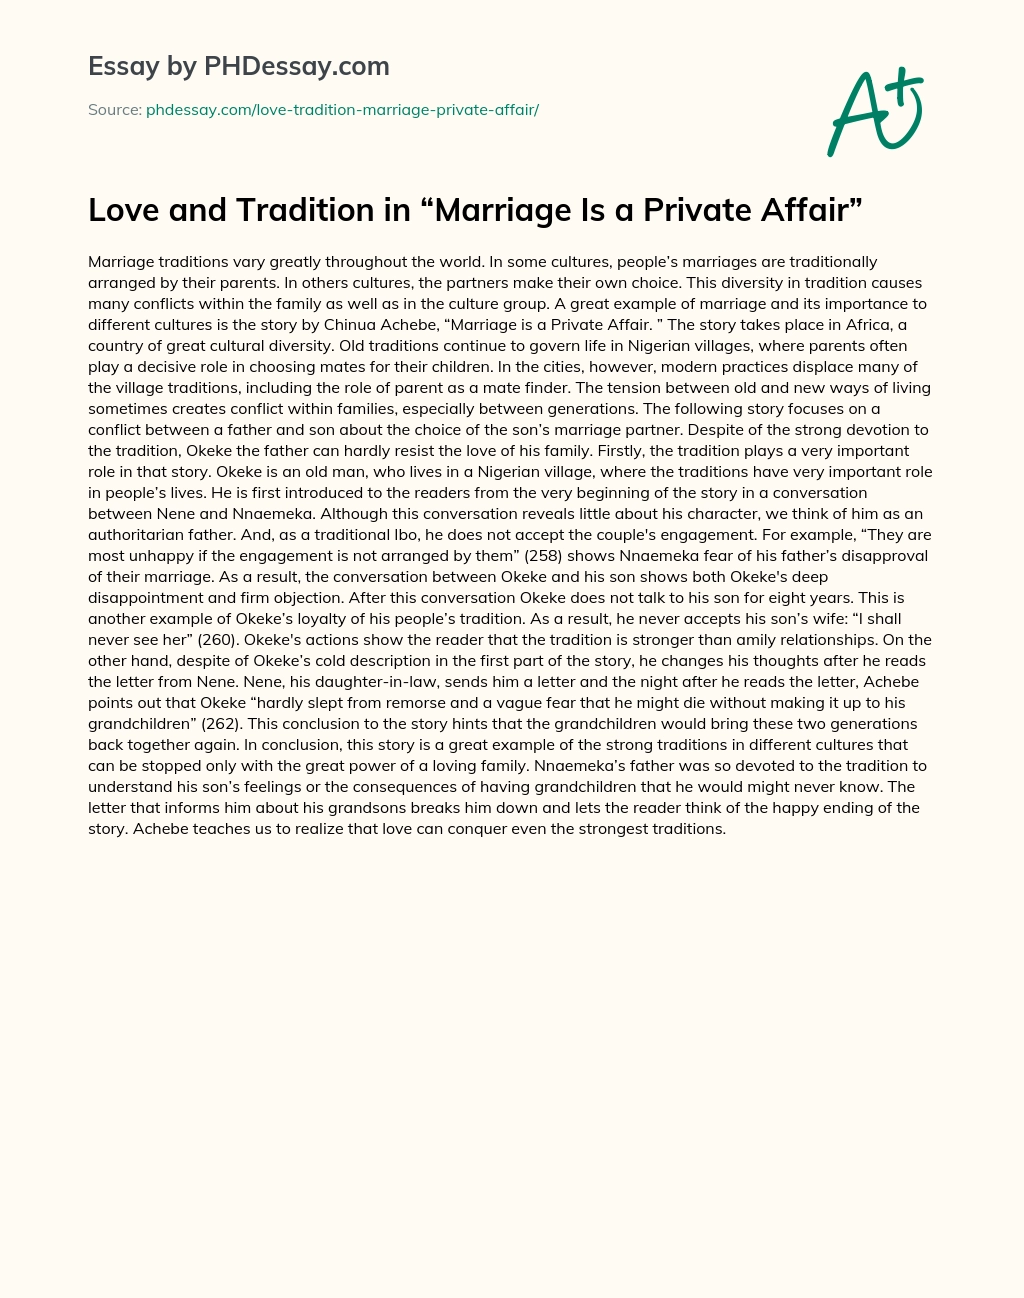 Love and Tradition in “Marriage Is a Private Affair” essay